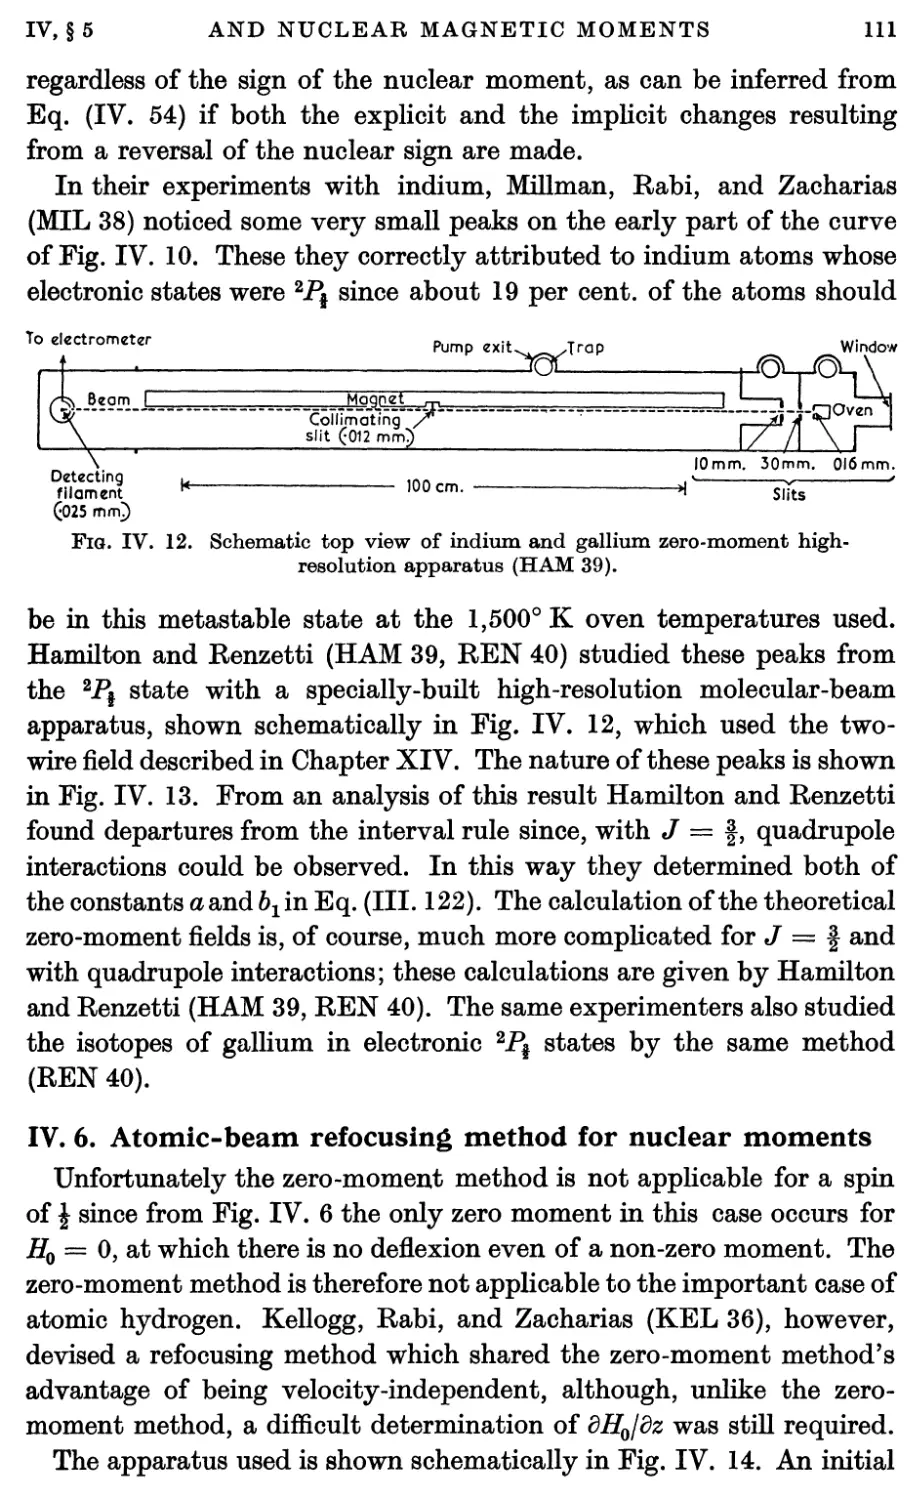 IV.6. Atomic-beam Refocusing Method for Nuclear Moments